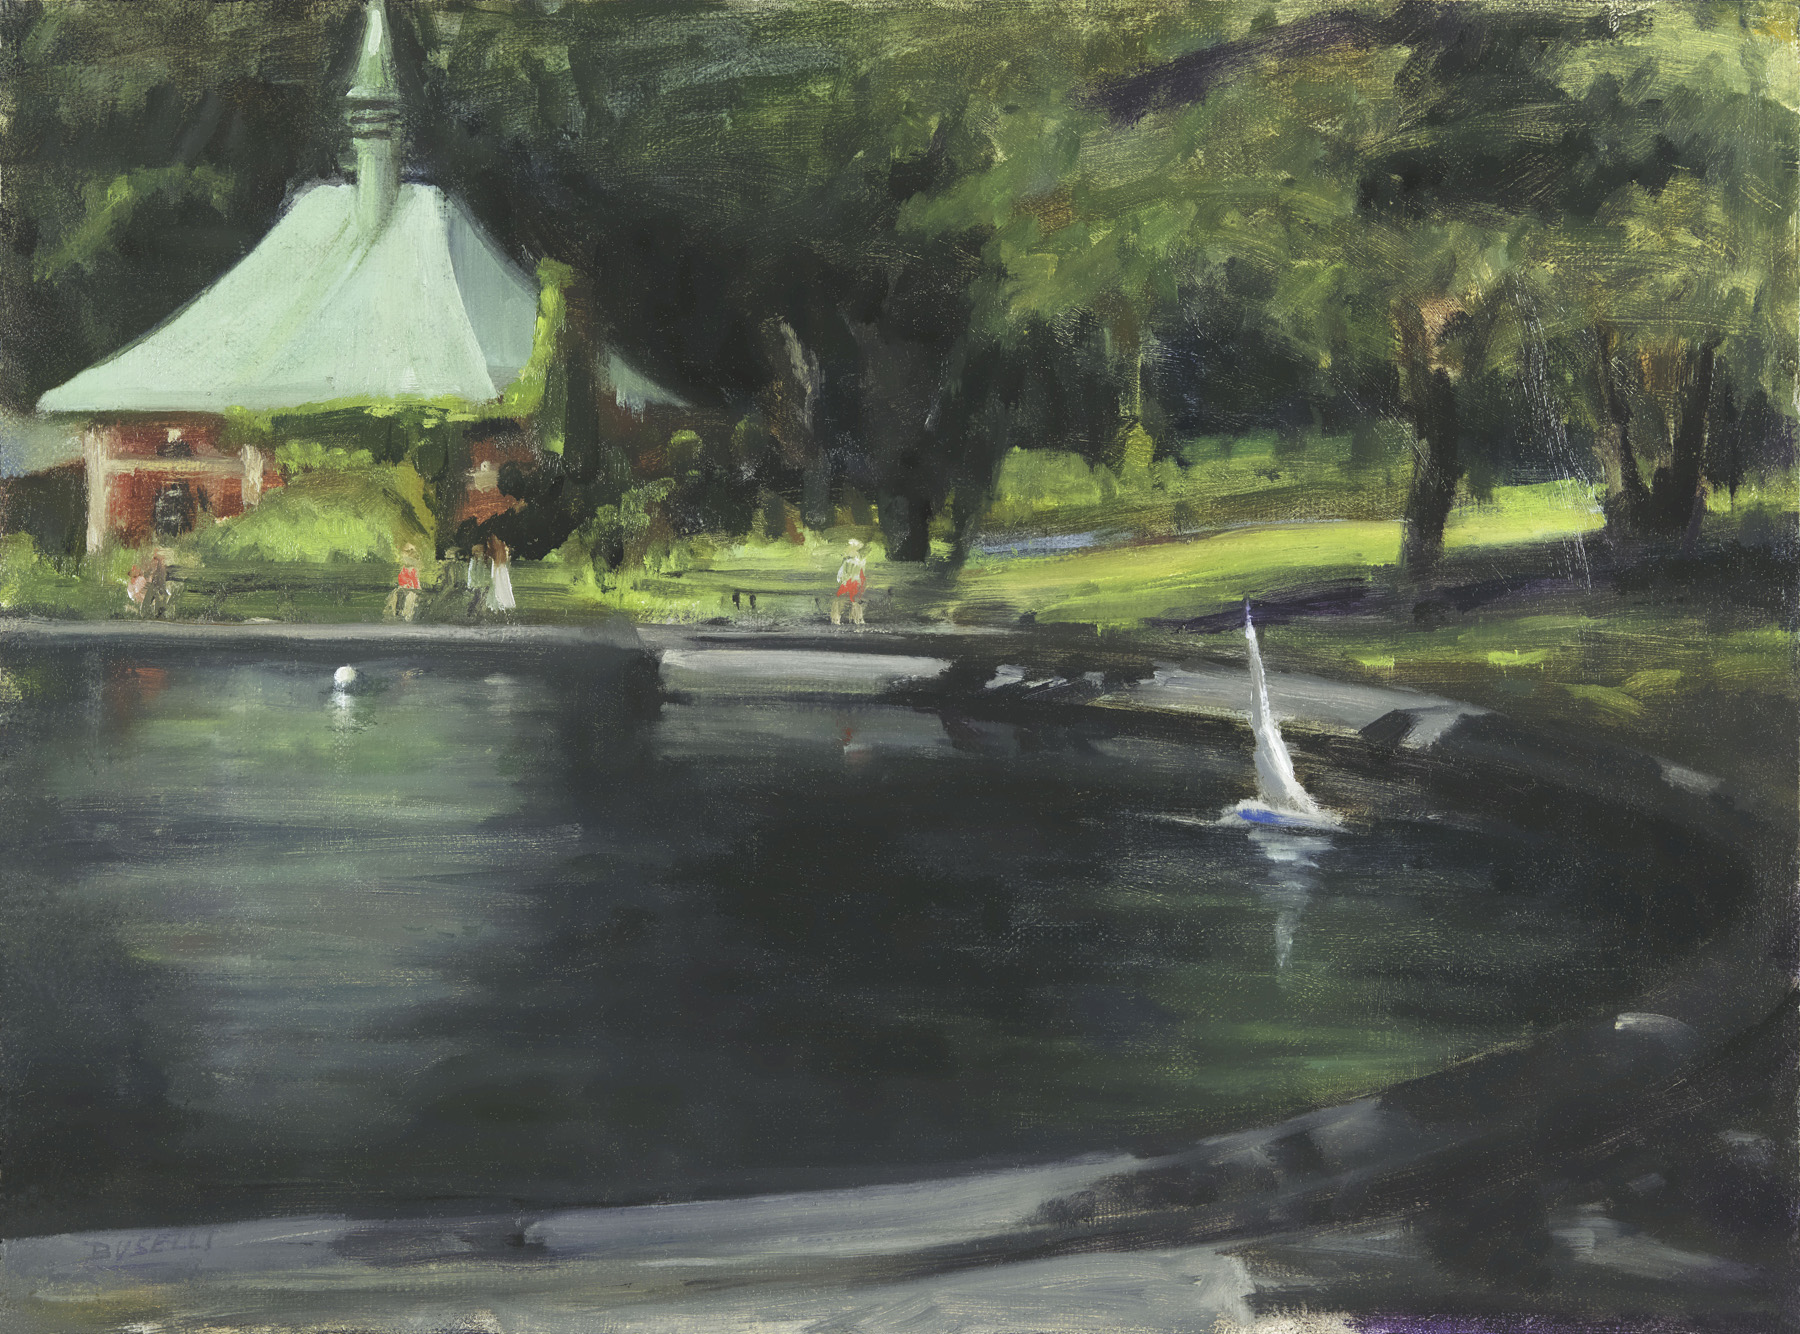  “INTO THE SHADOWS  at the BOAT POND, CENTRAL PARK, NYC”  oil on linen | 12” x 16” 